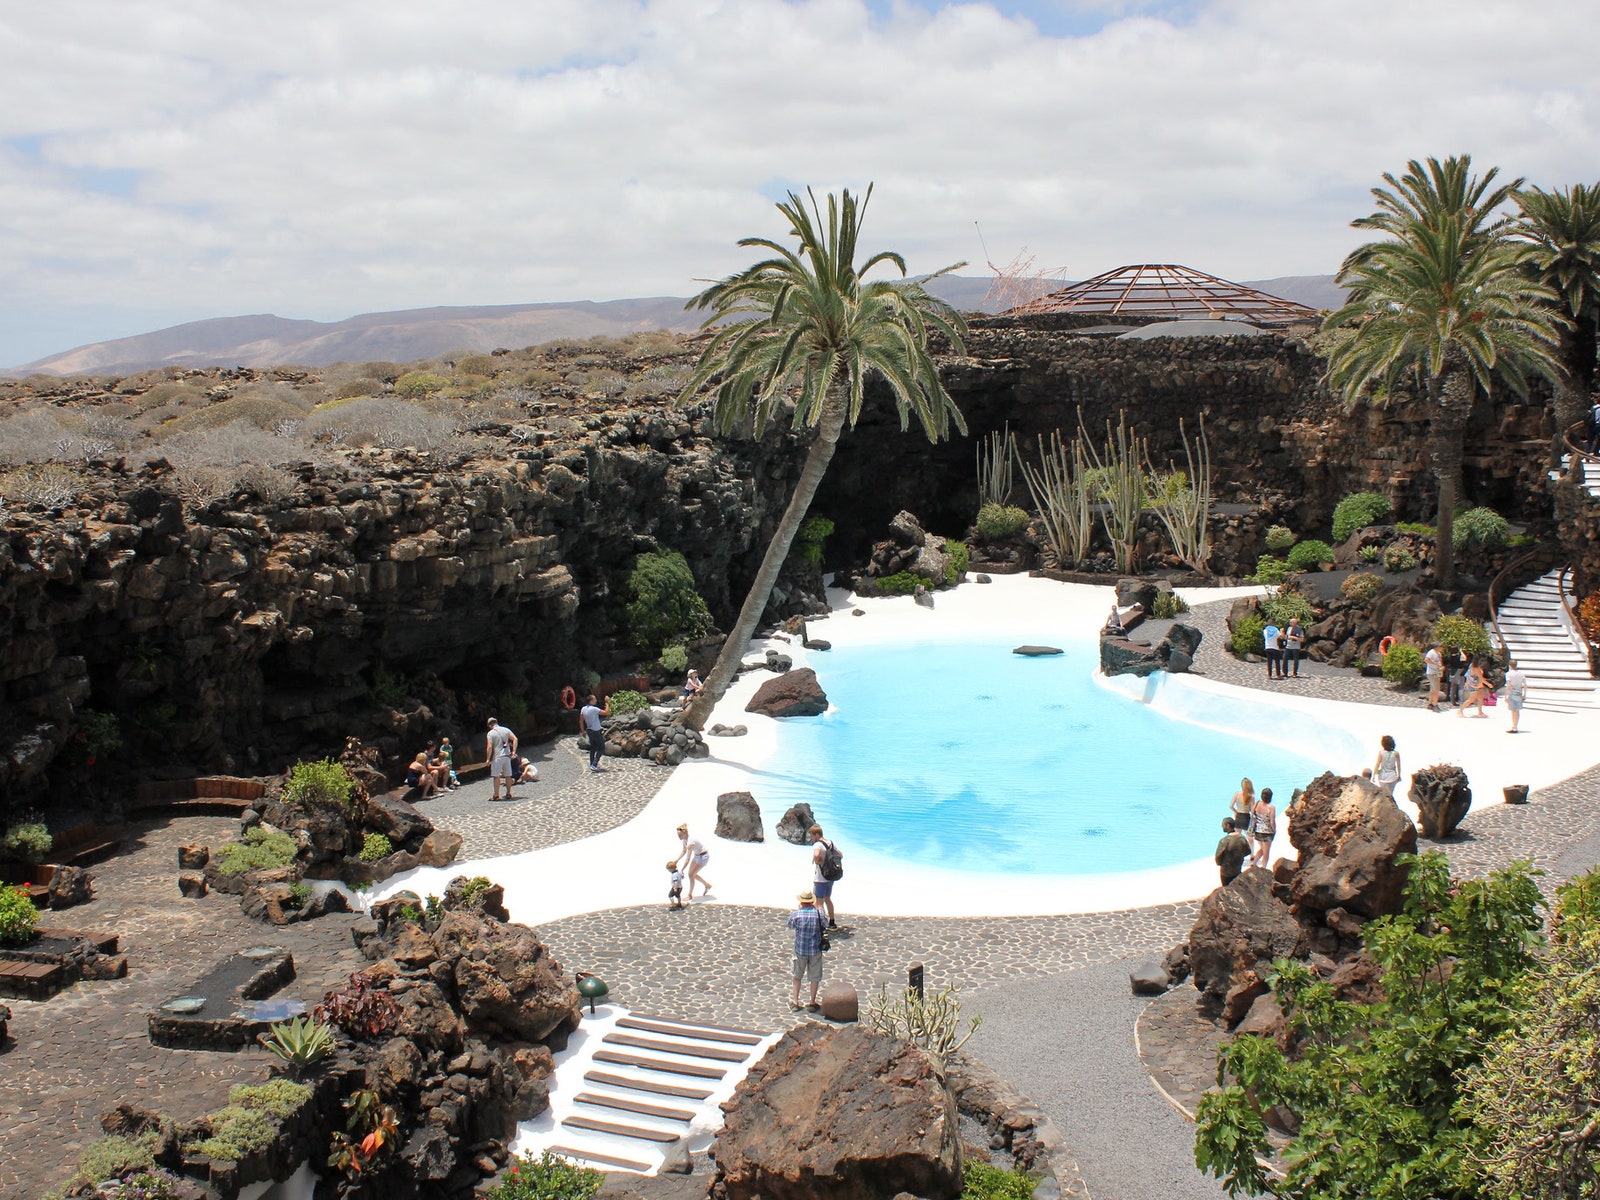 Ellen van Loon on her favourite architectural holiday spot, Jameos del Agua